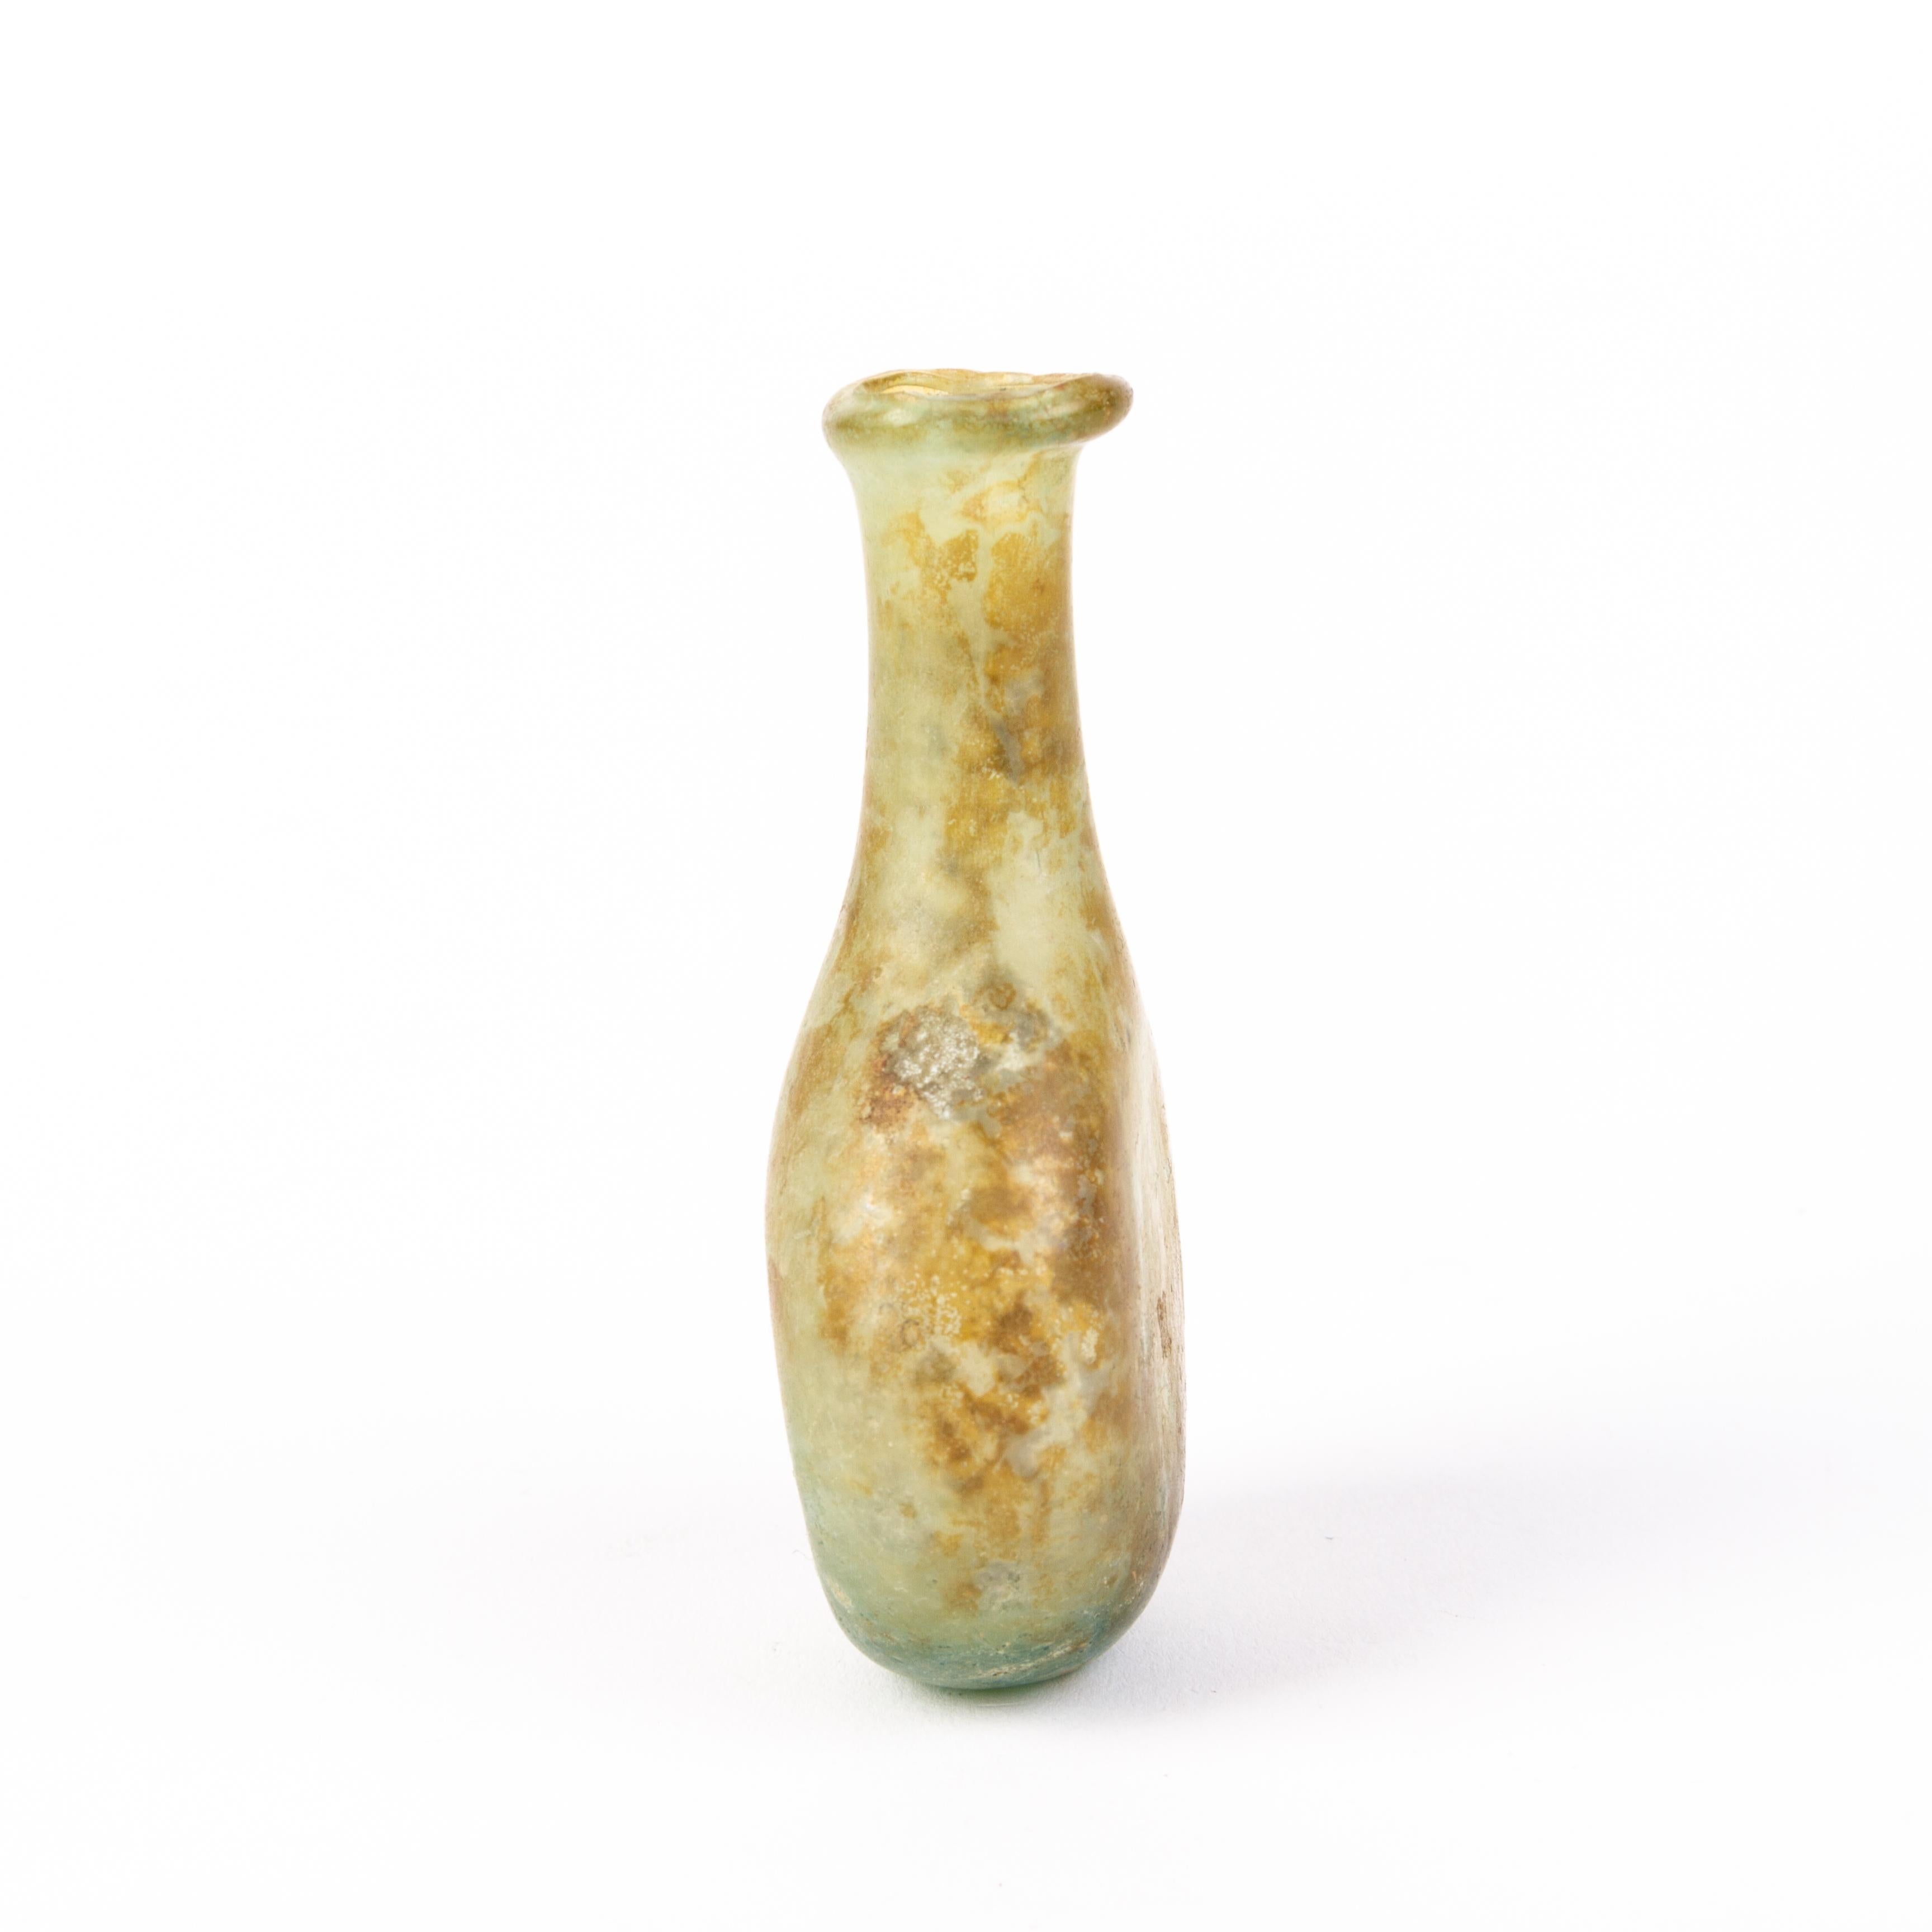 In good condition
From a private collection
Free international shipping
Ancient Roman Glass Bottle 1st Century AD